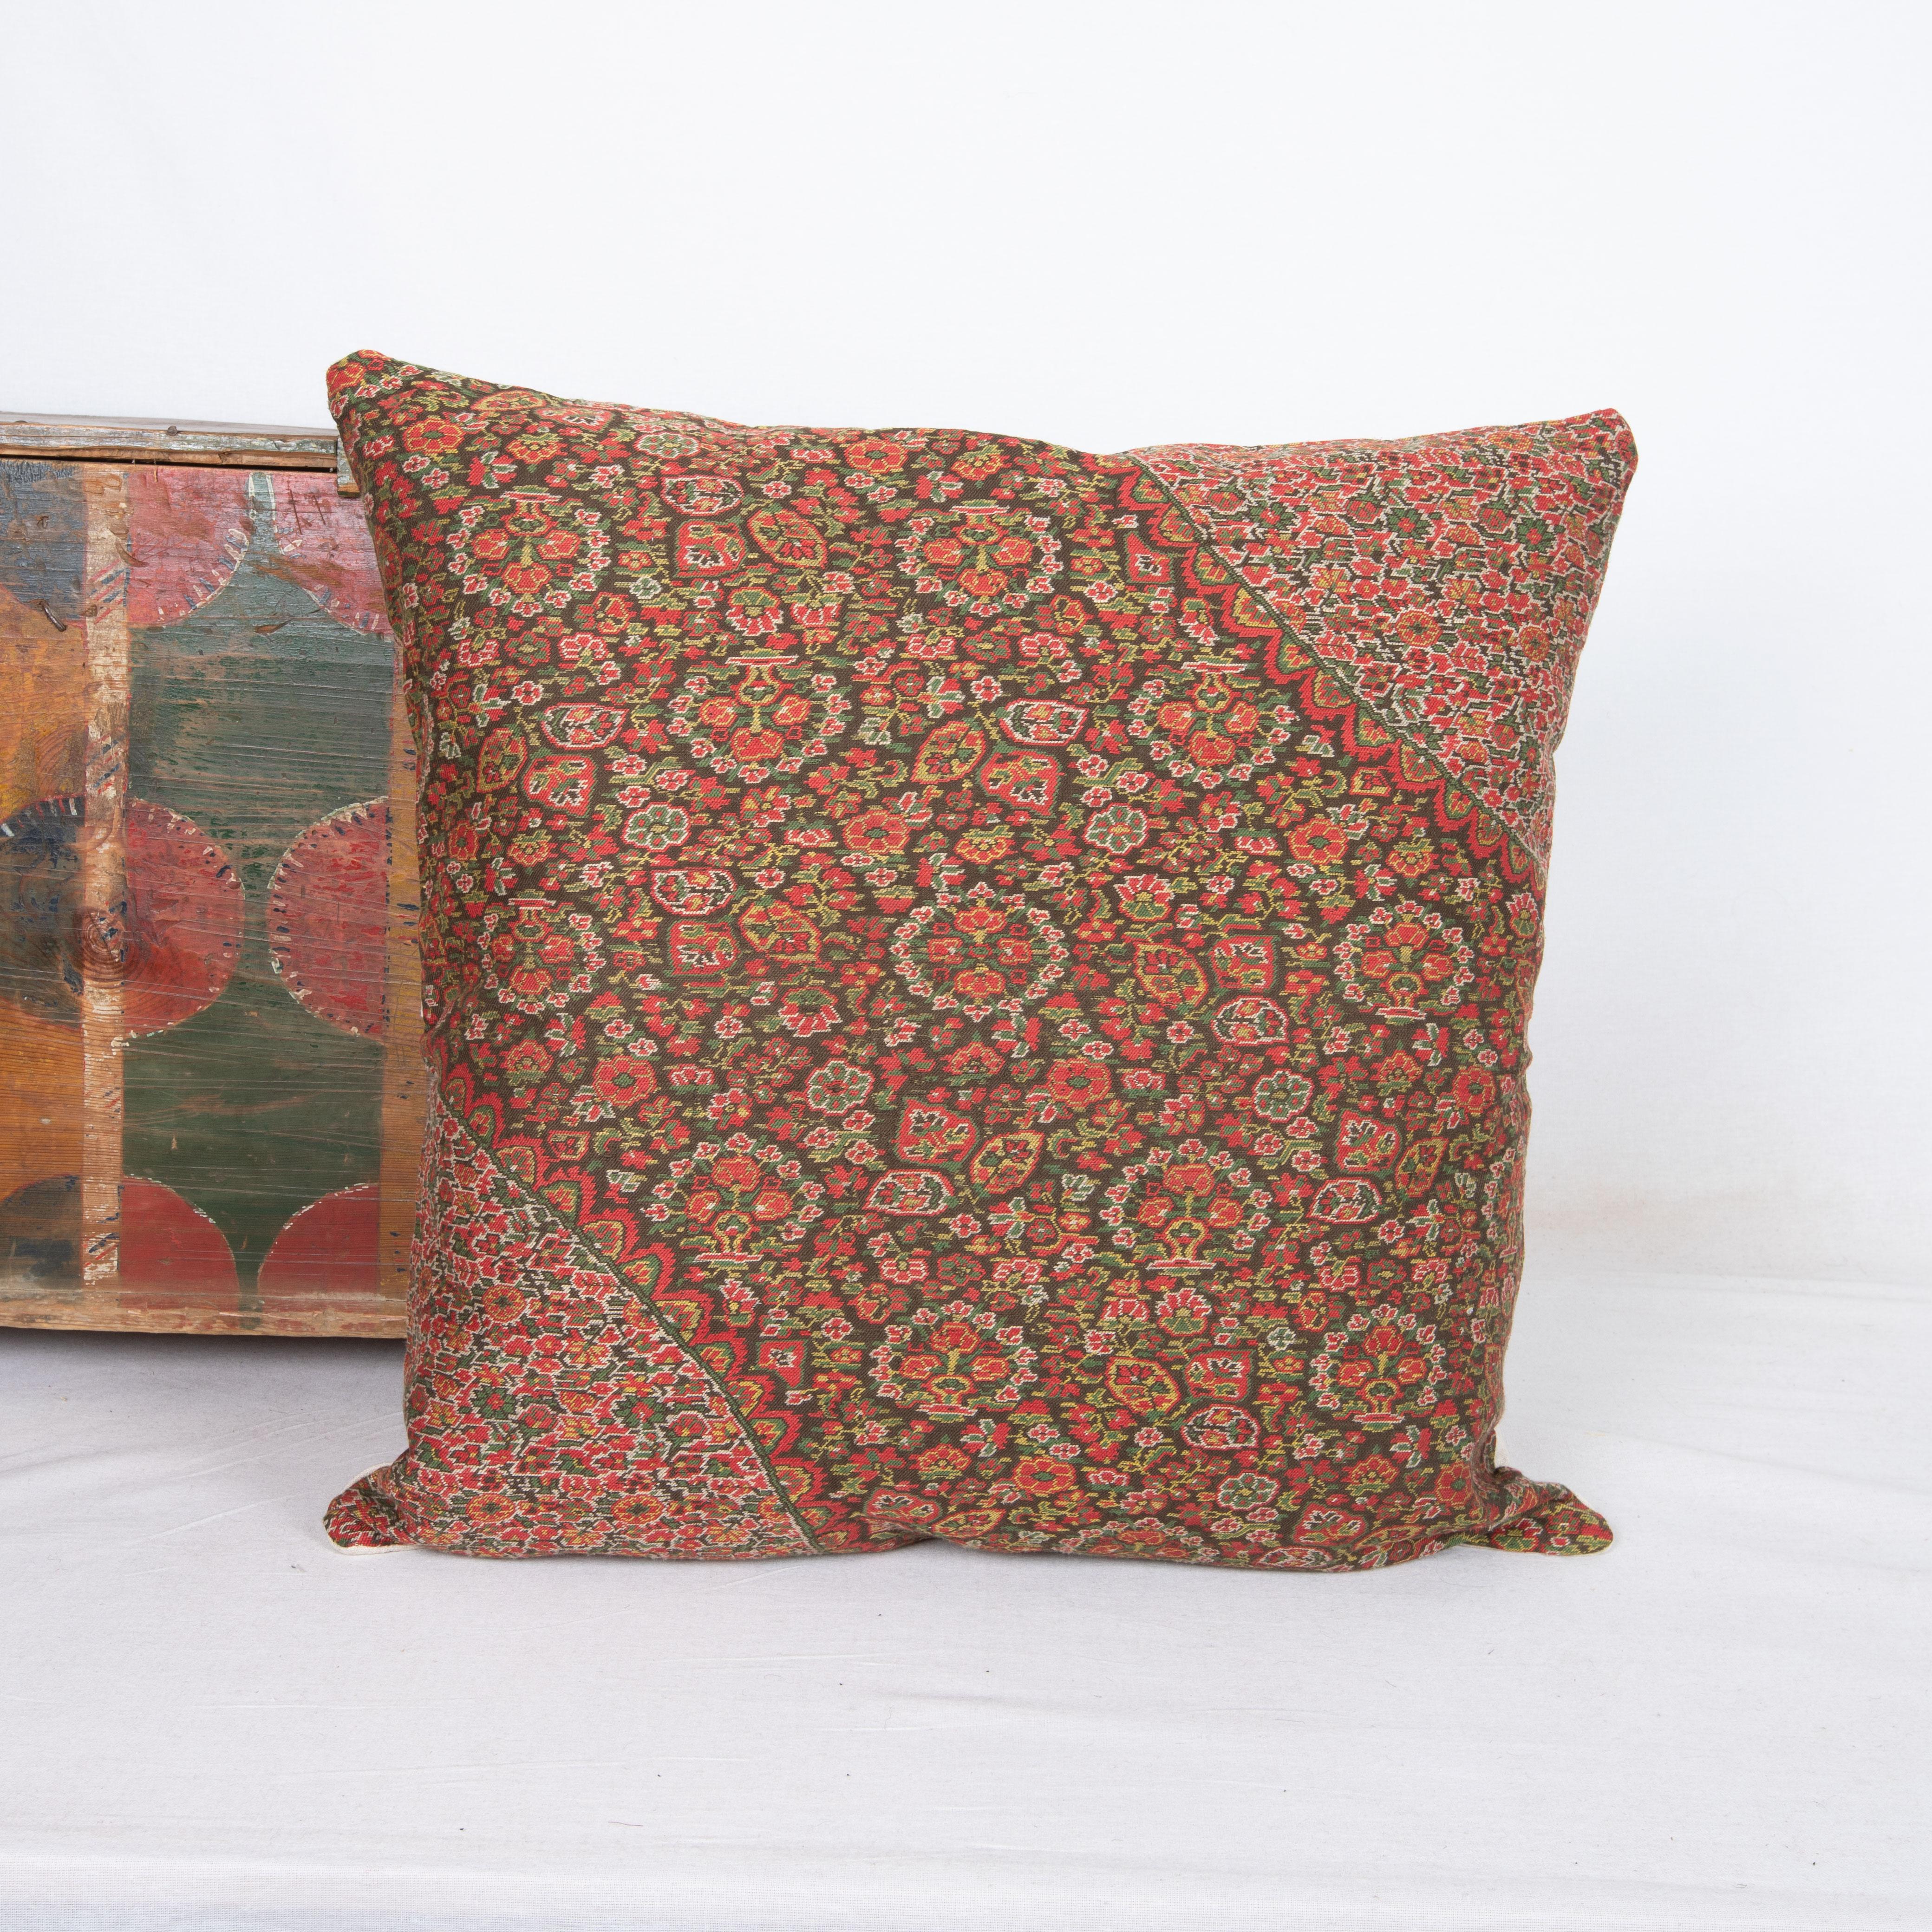 Antique Pillow Cover Made from a European Wool Paisley Shawl, L 19th/ E.20th C. For Sale 1